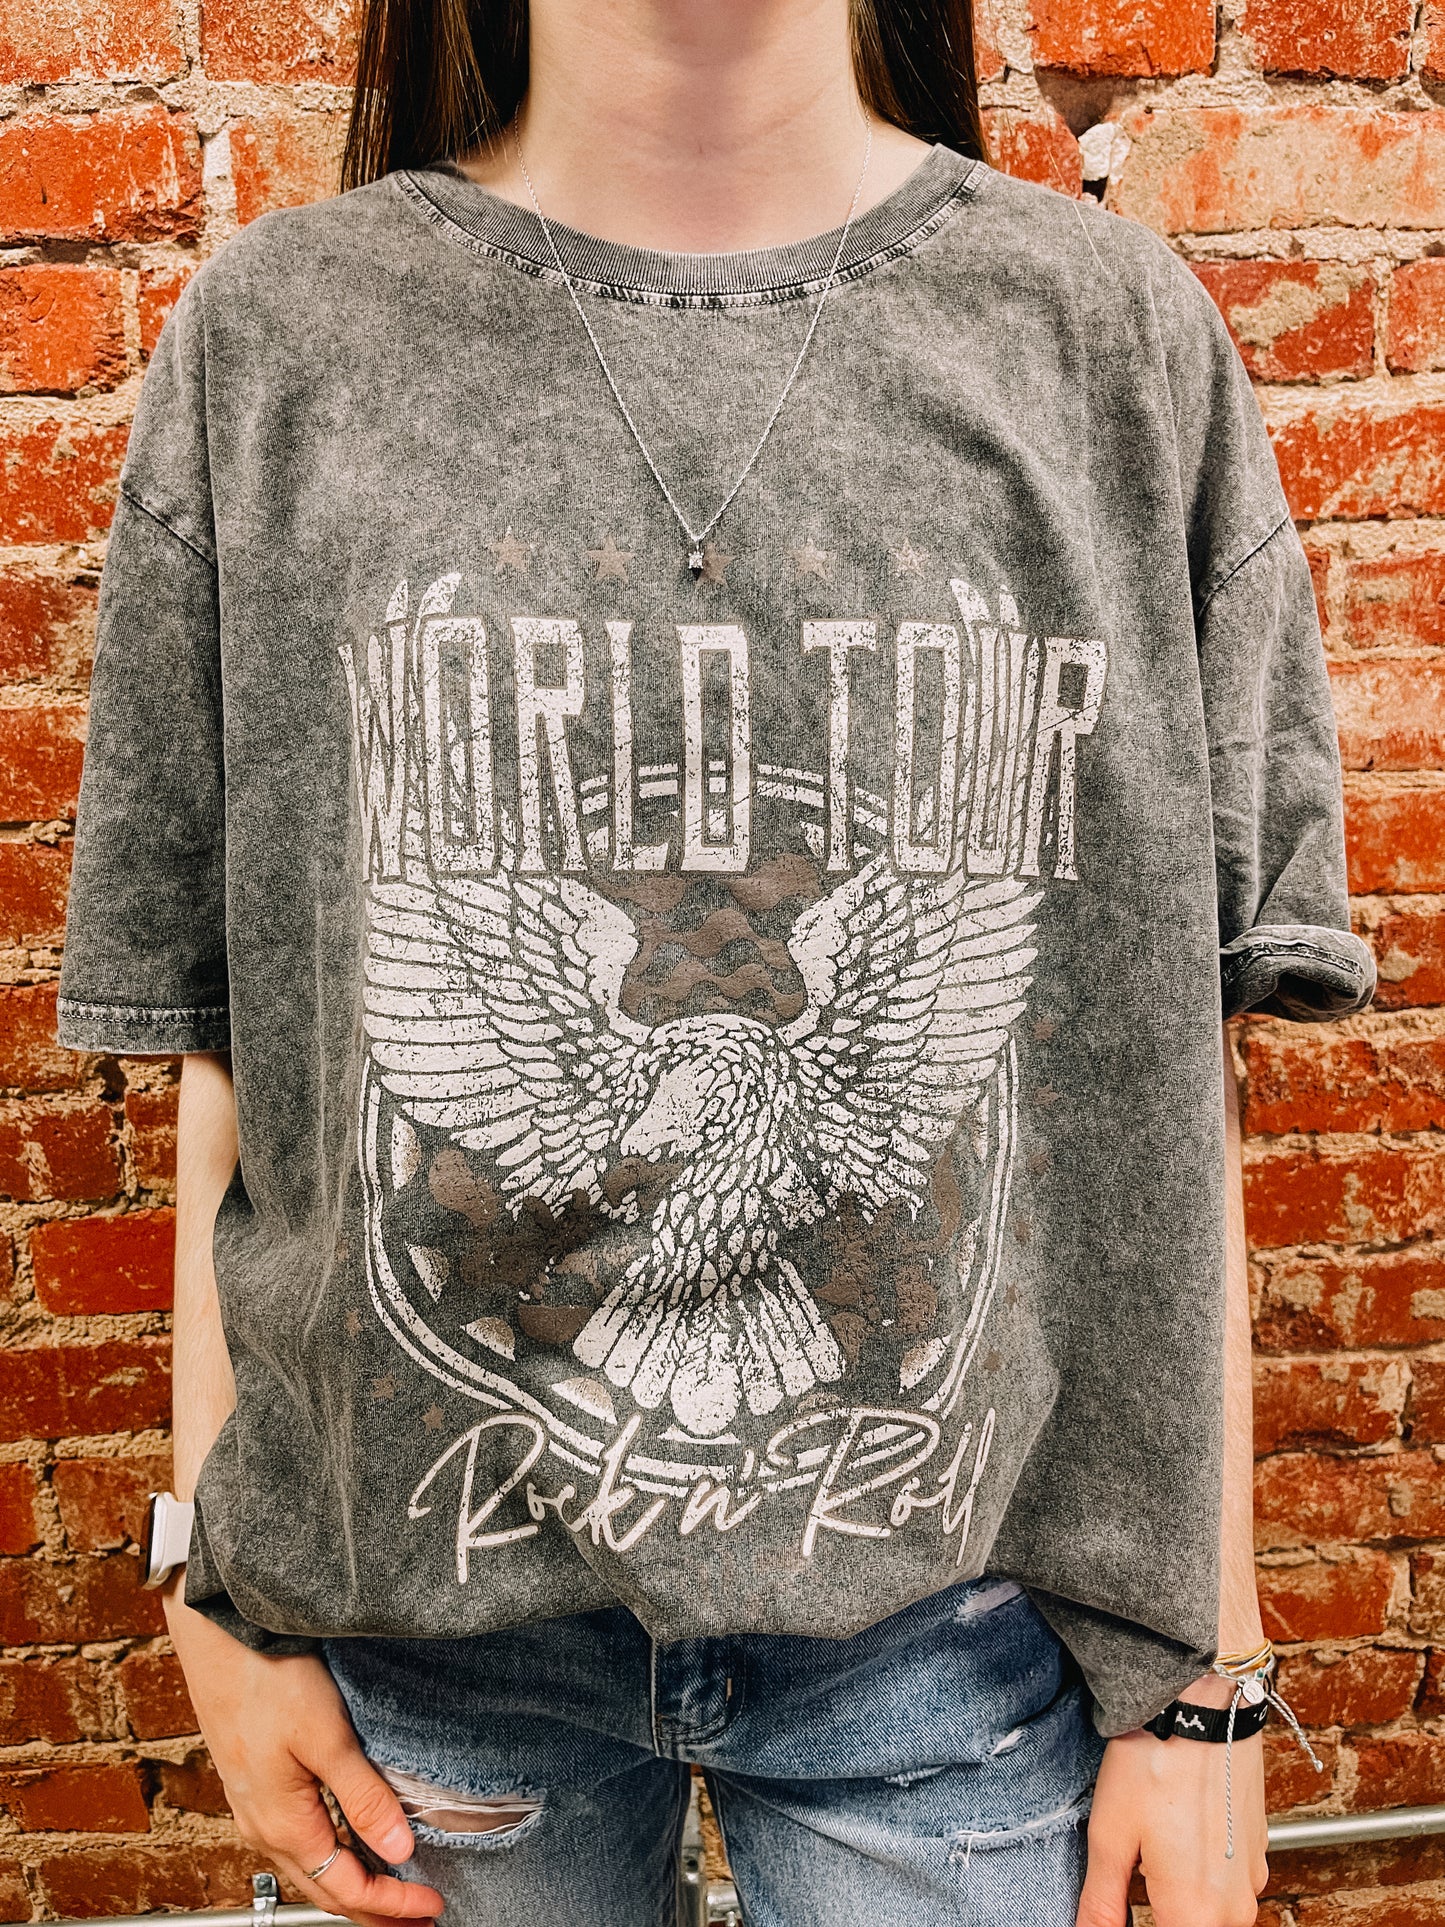 World Tour Rock N' Roll Graphic tee